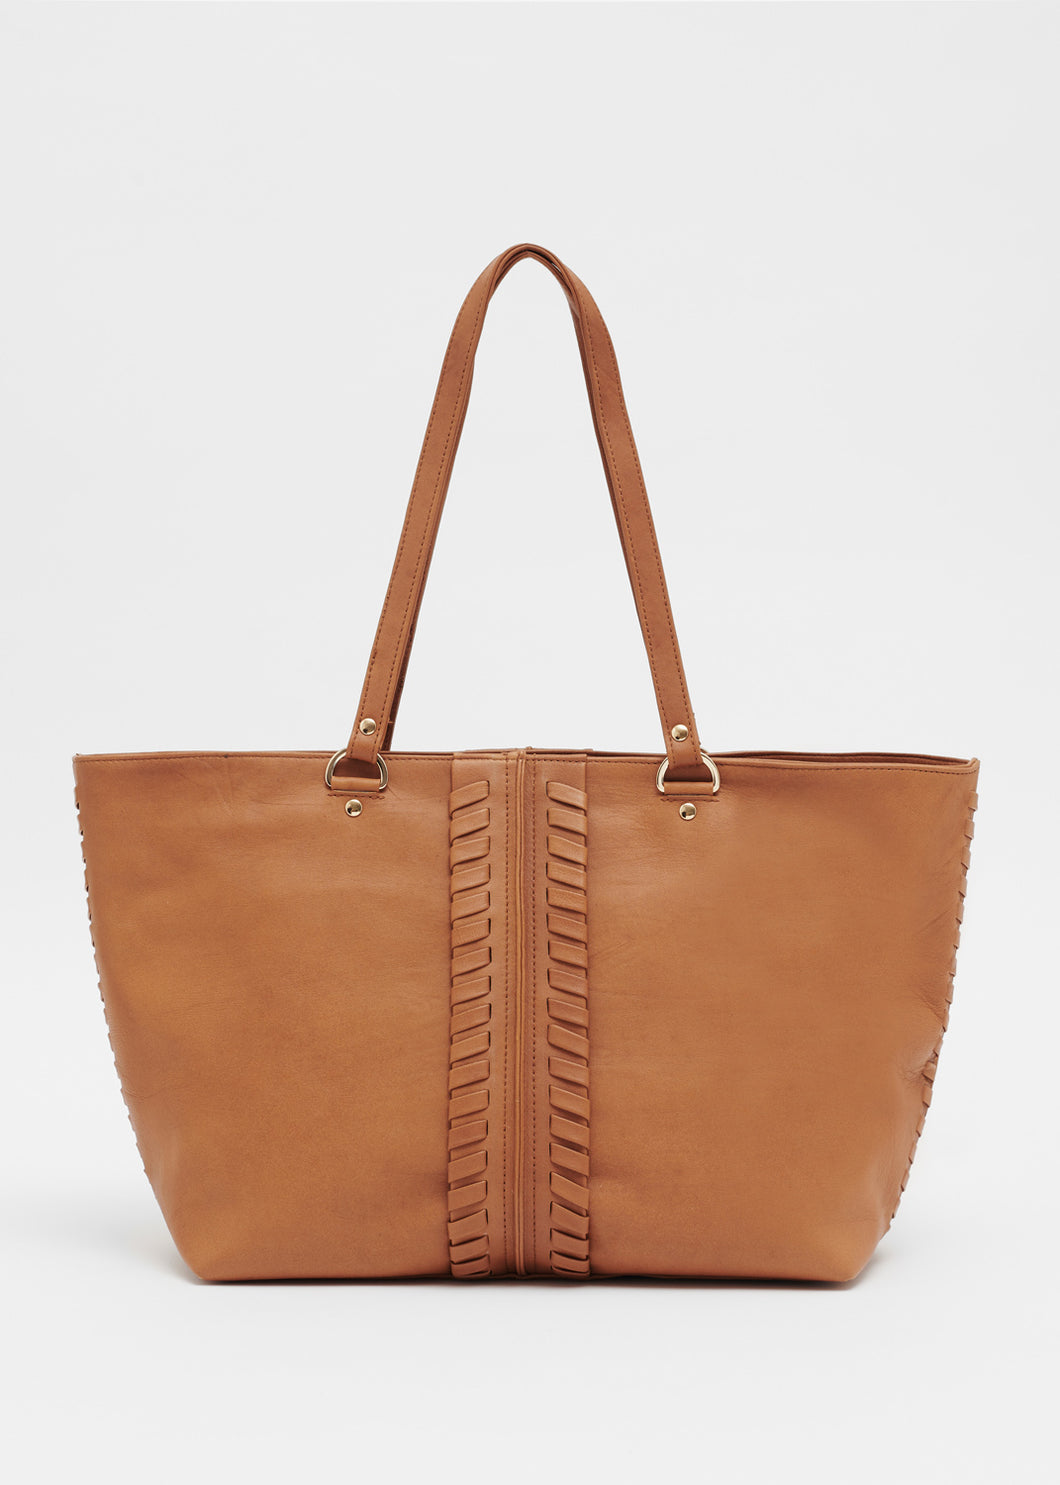 Michelle_Tote_in_Tan_Leather